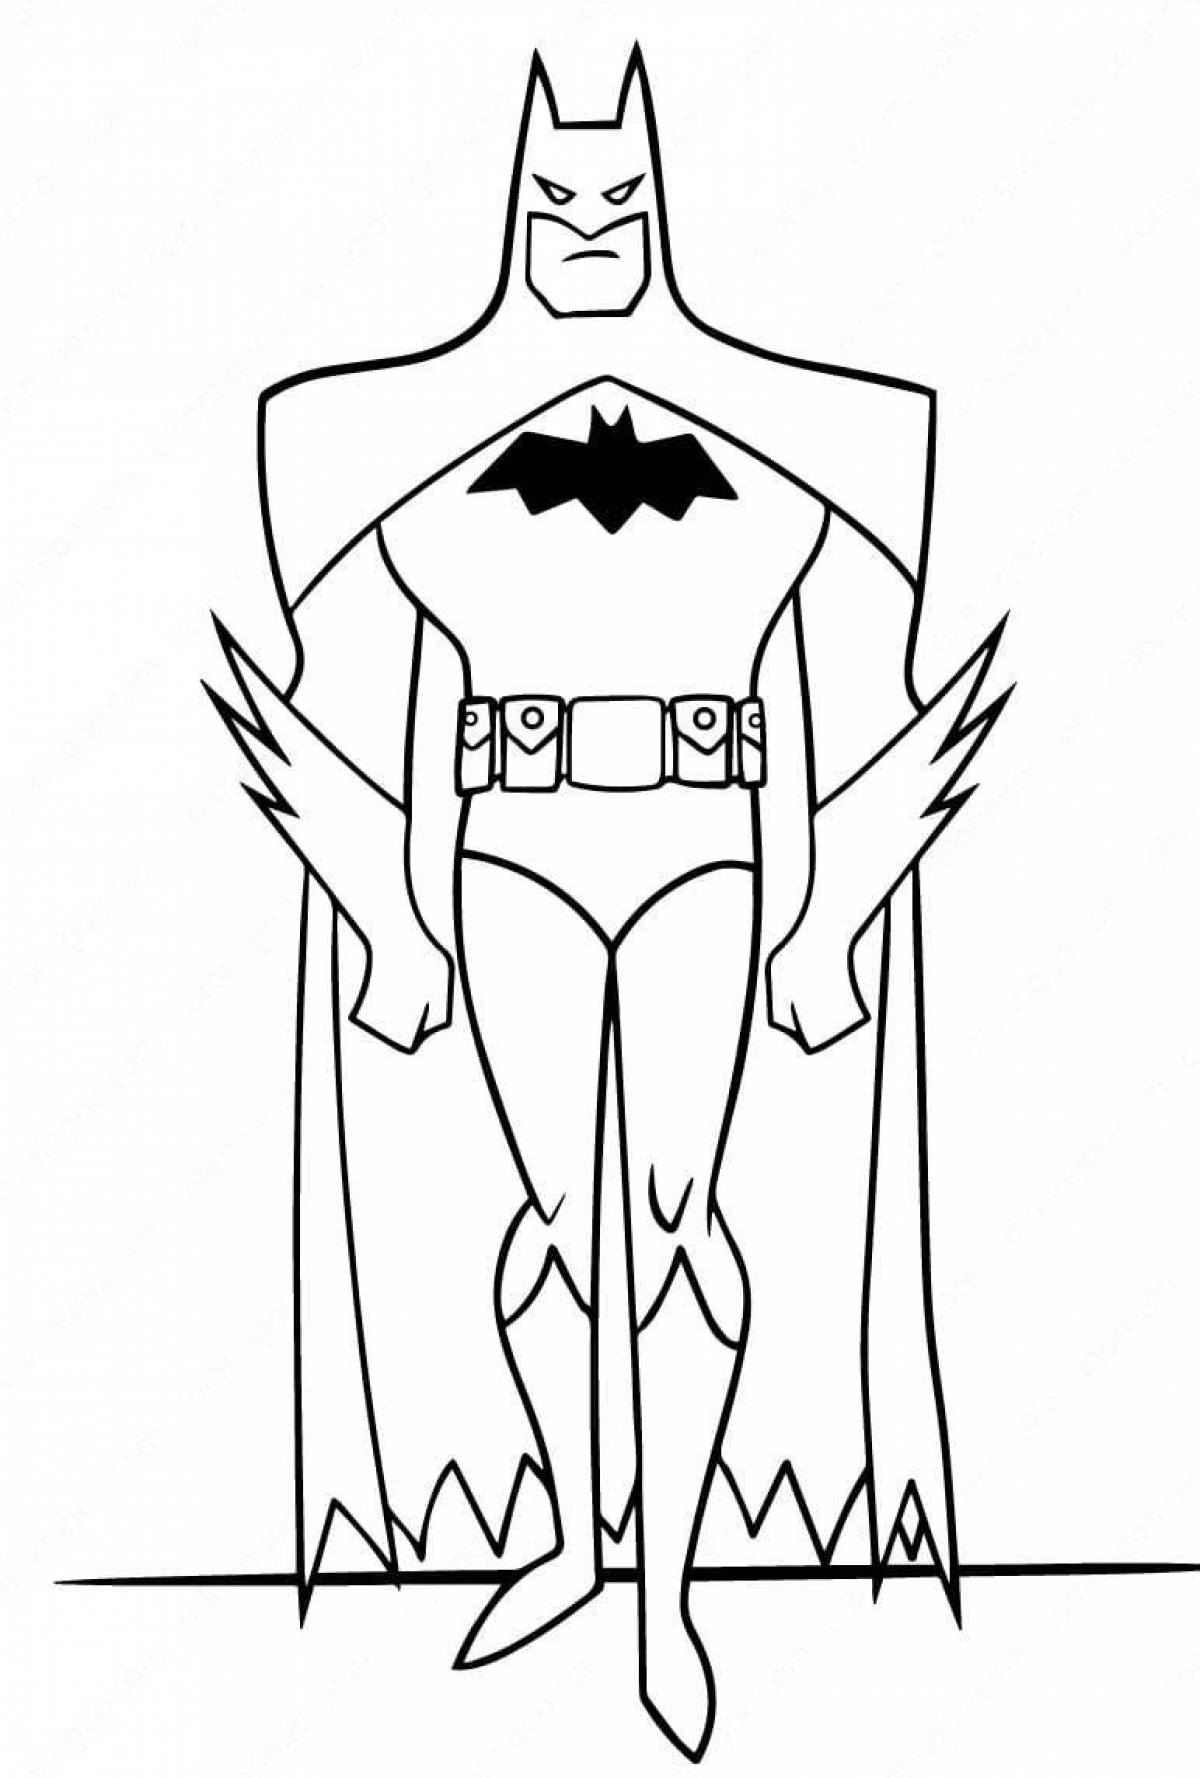 Bright batman coloring for mobile devices